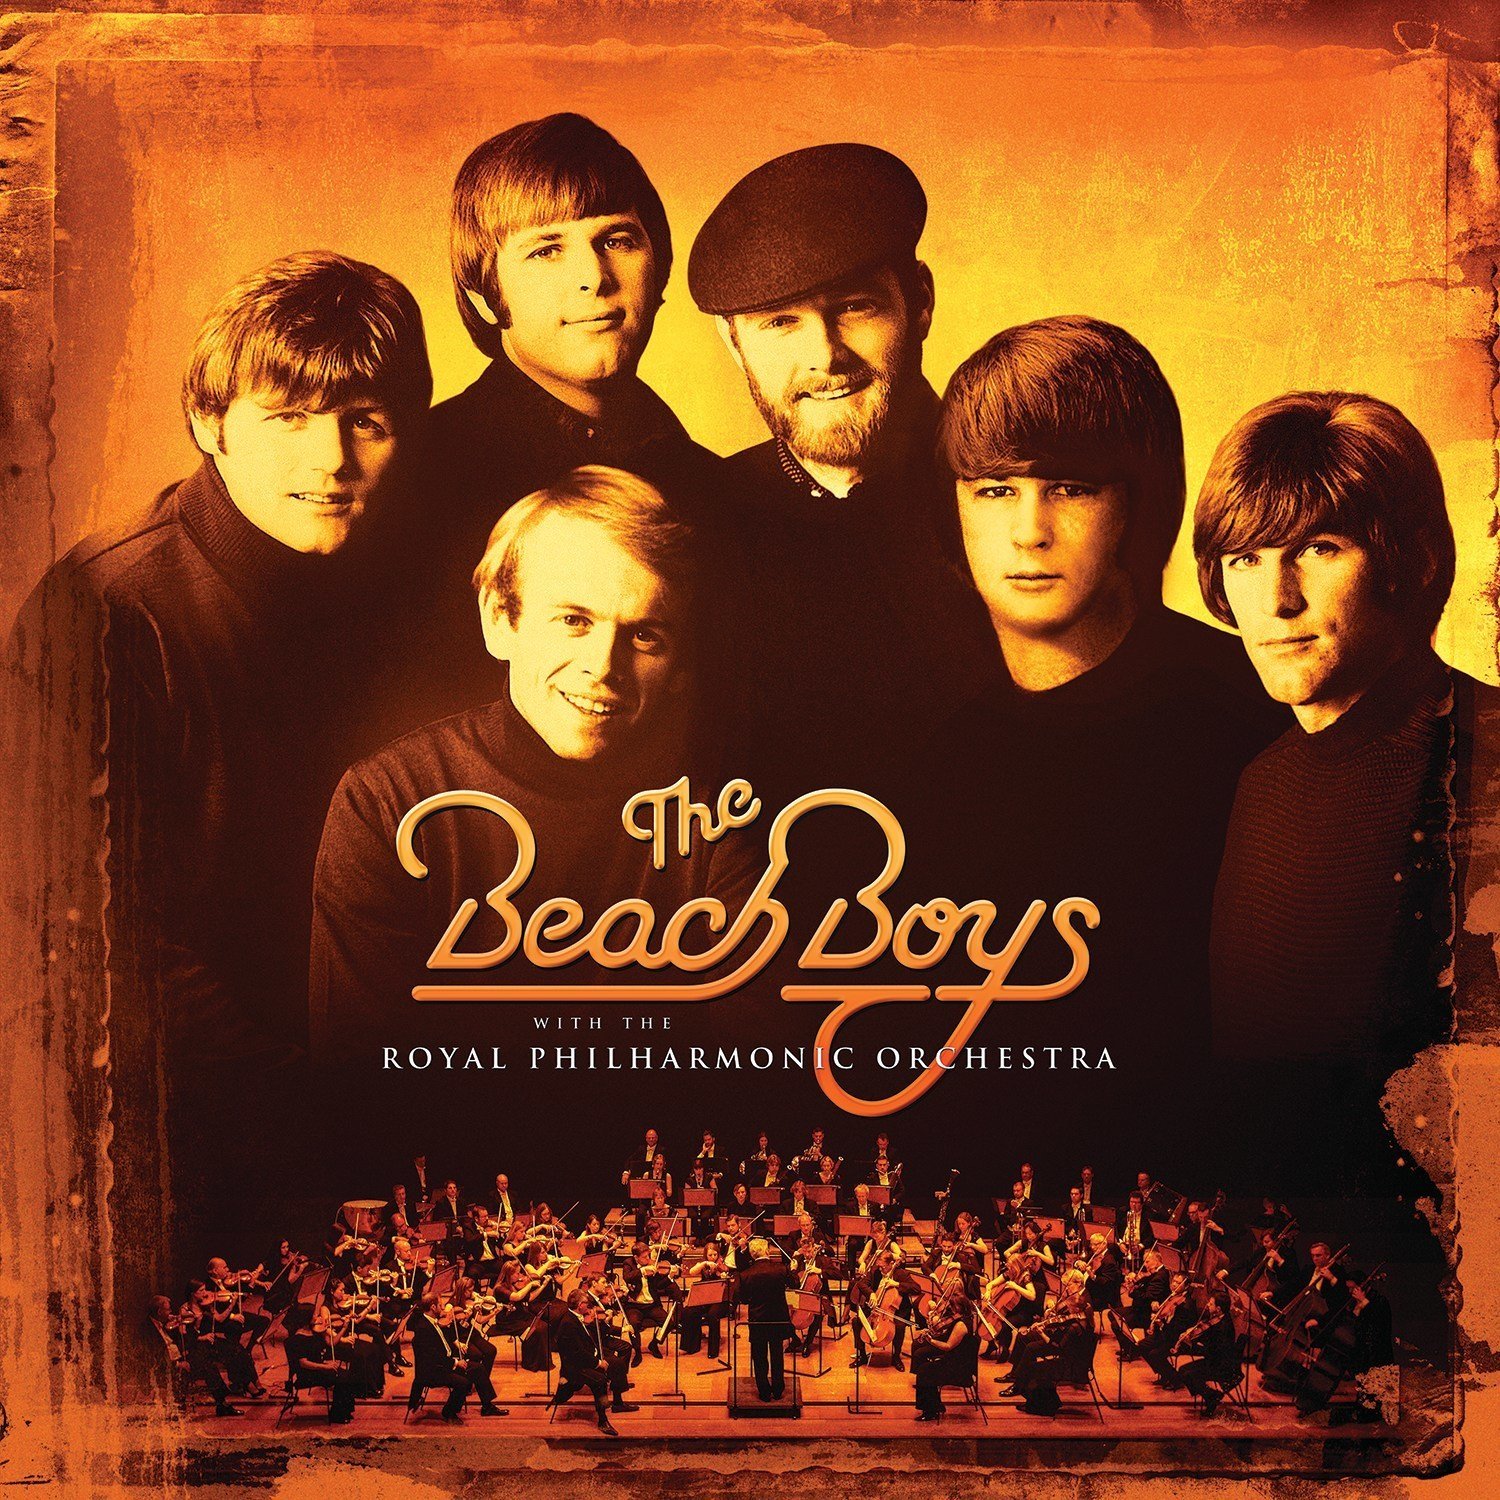 The Beach Boys-The Beach Boys With The Royal Philharmonic Orchestra-24-96-WEB-FLAC-2018-OBZEN Download